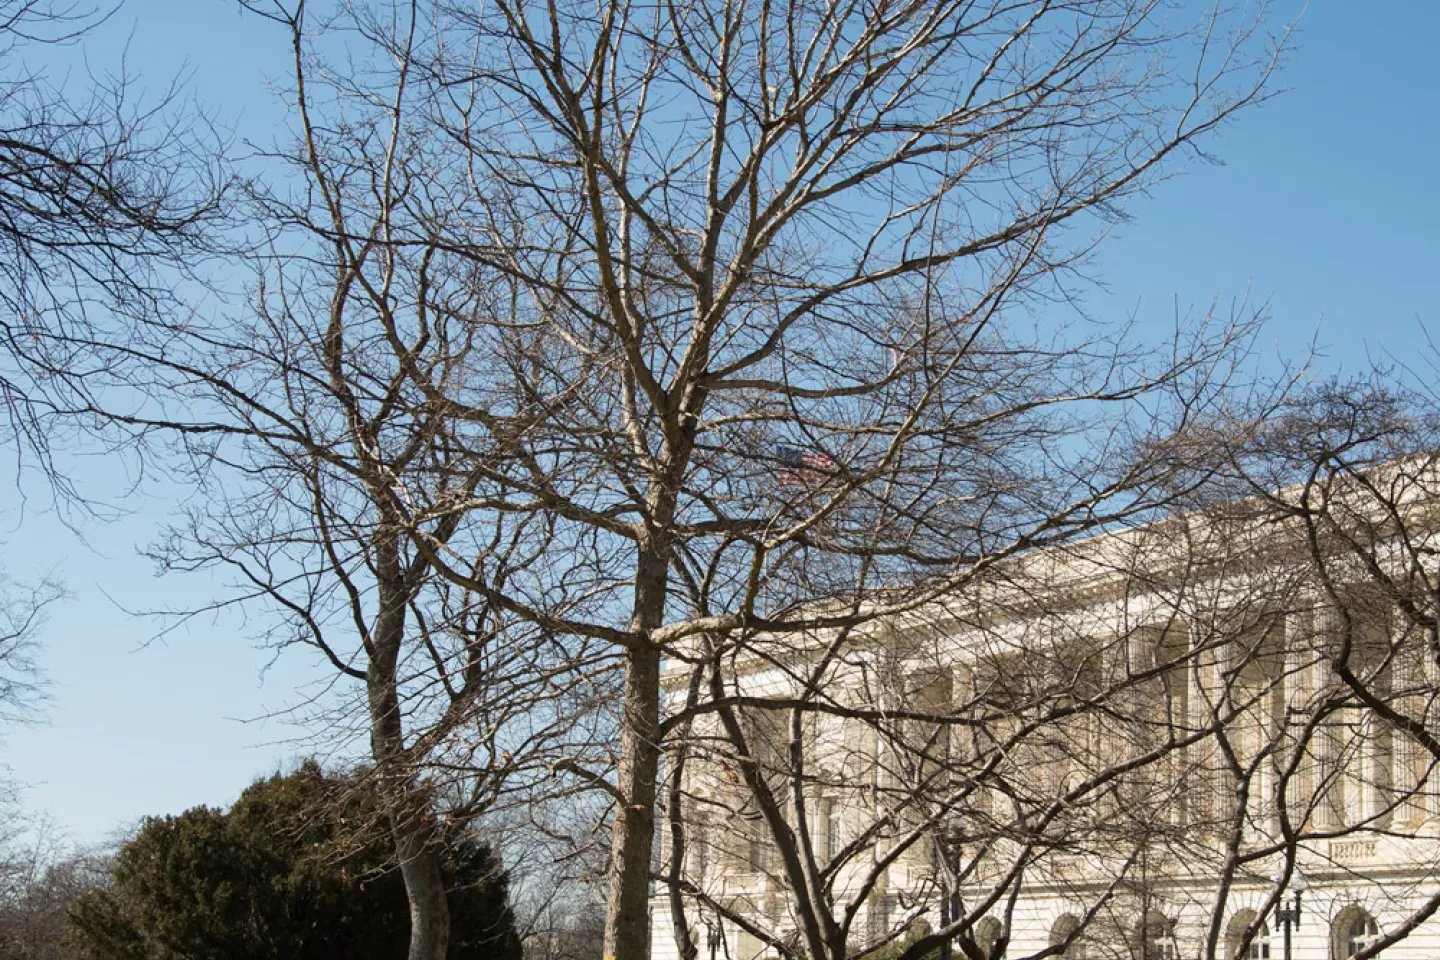 The Senator Byrd tree on the U.S. Capitol Grounds during winter.